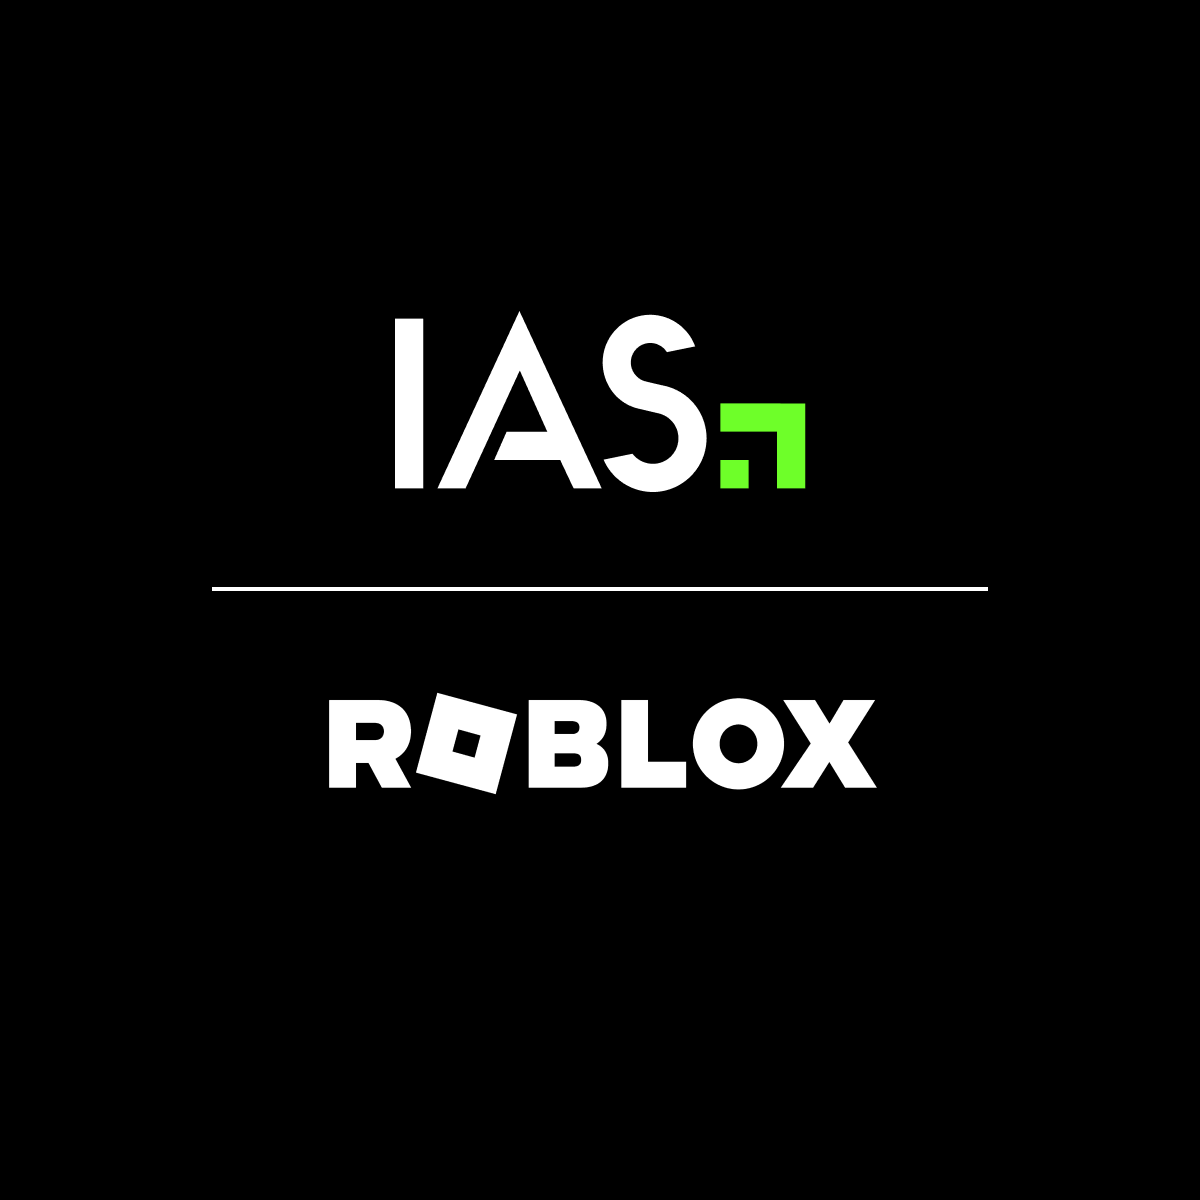 IAS announces first-to-market partnership with Roblox.